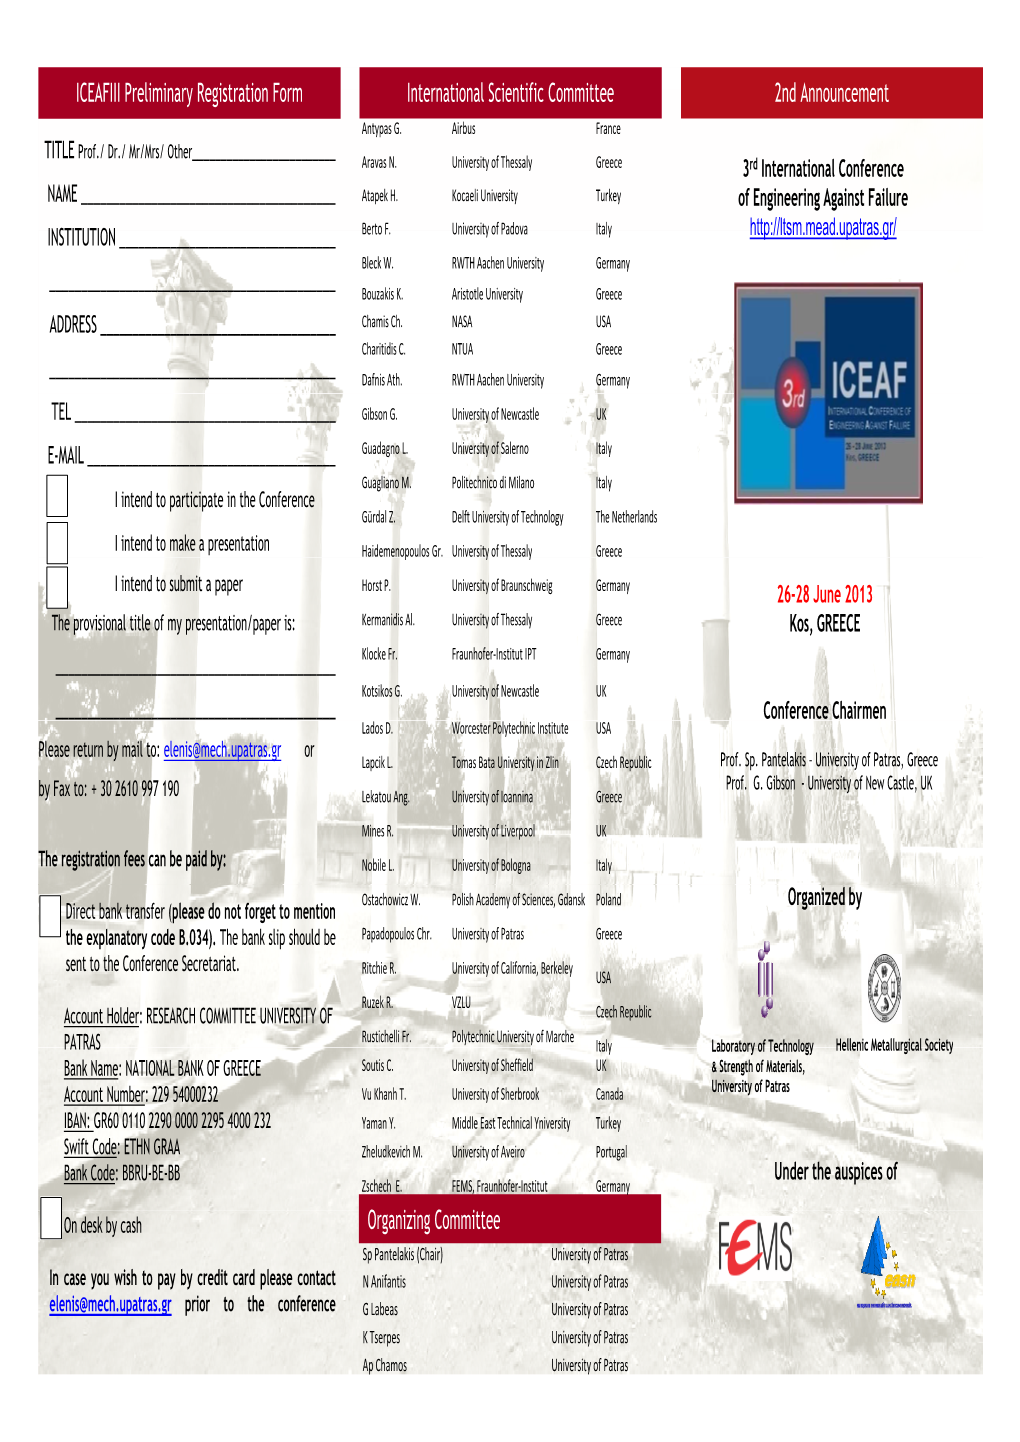 2Nd Announcement ICEAFIII Preliminary Registration Form